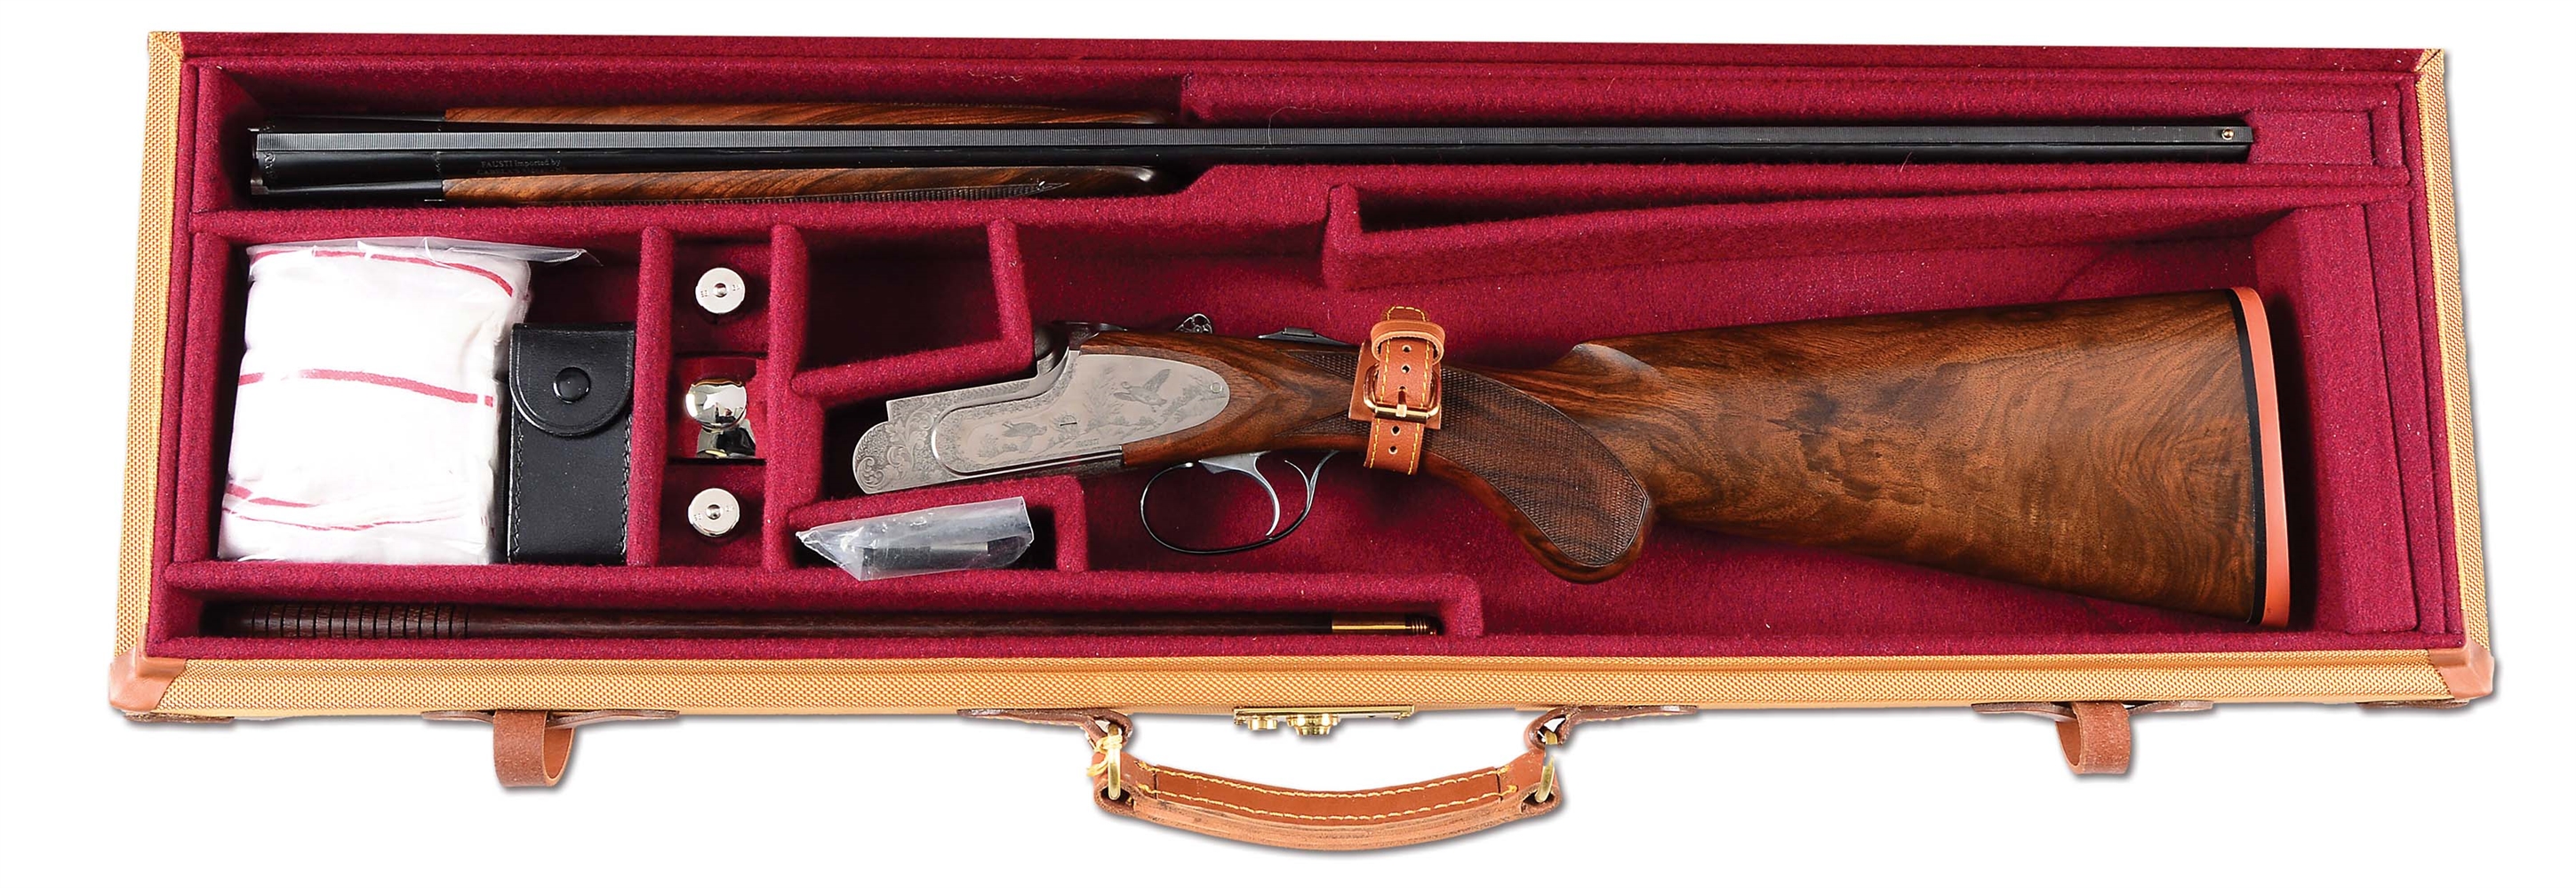 (M) FAUSTI SIDEPLATED BOXLOCK 28 GAUGE OU SHOTGUN WITH CASES.